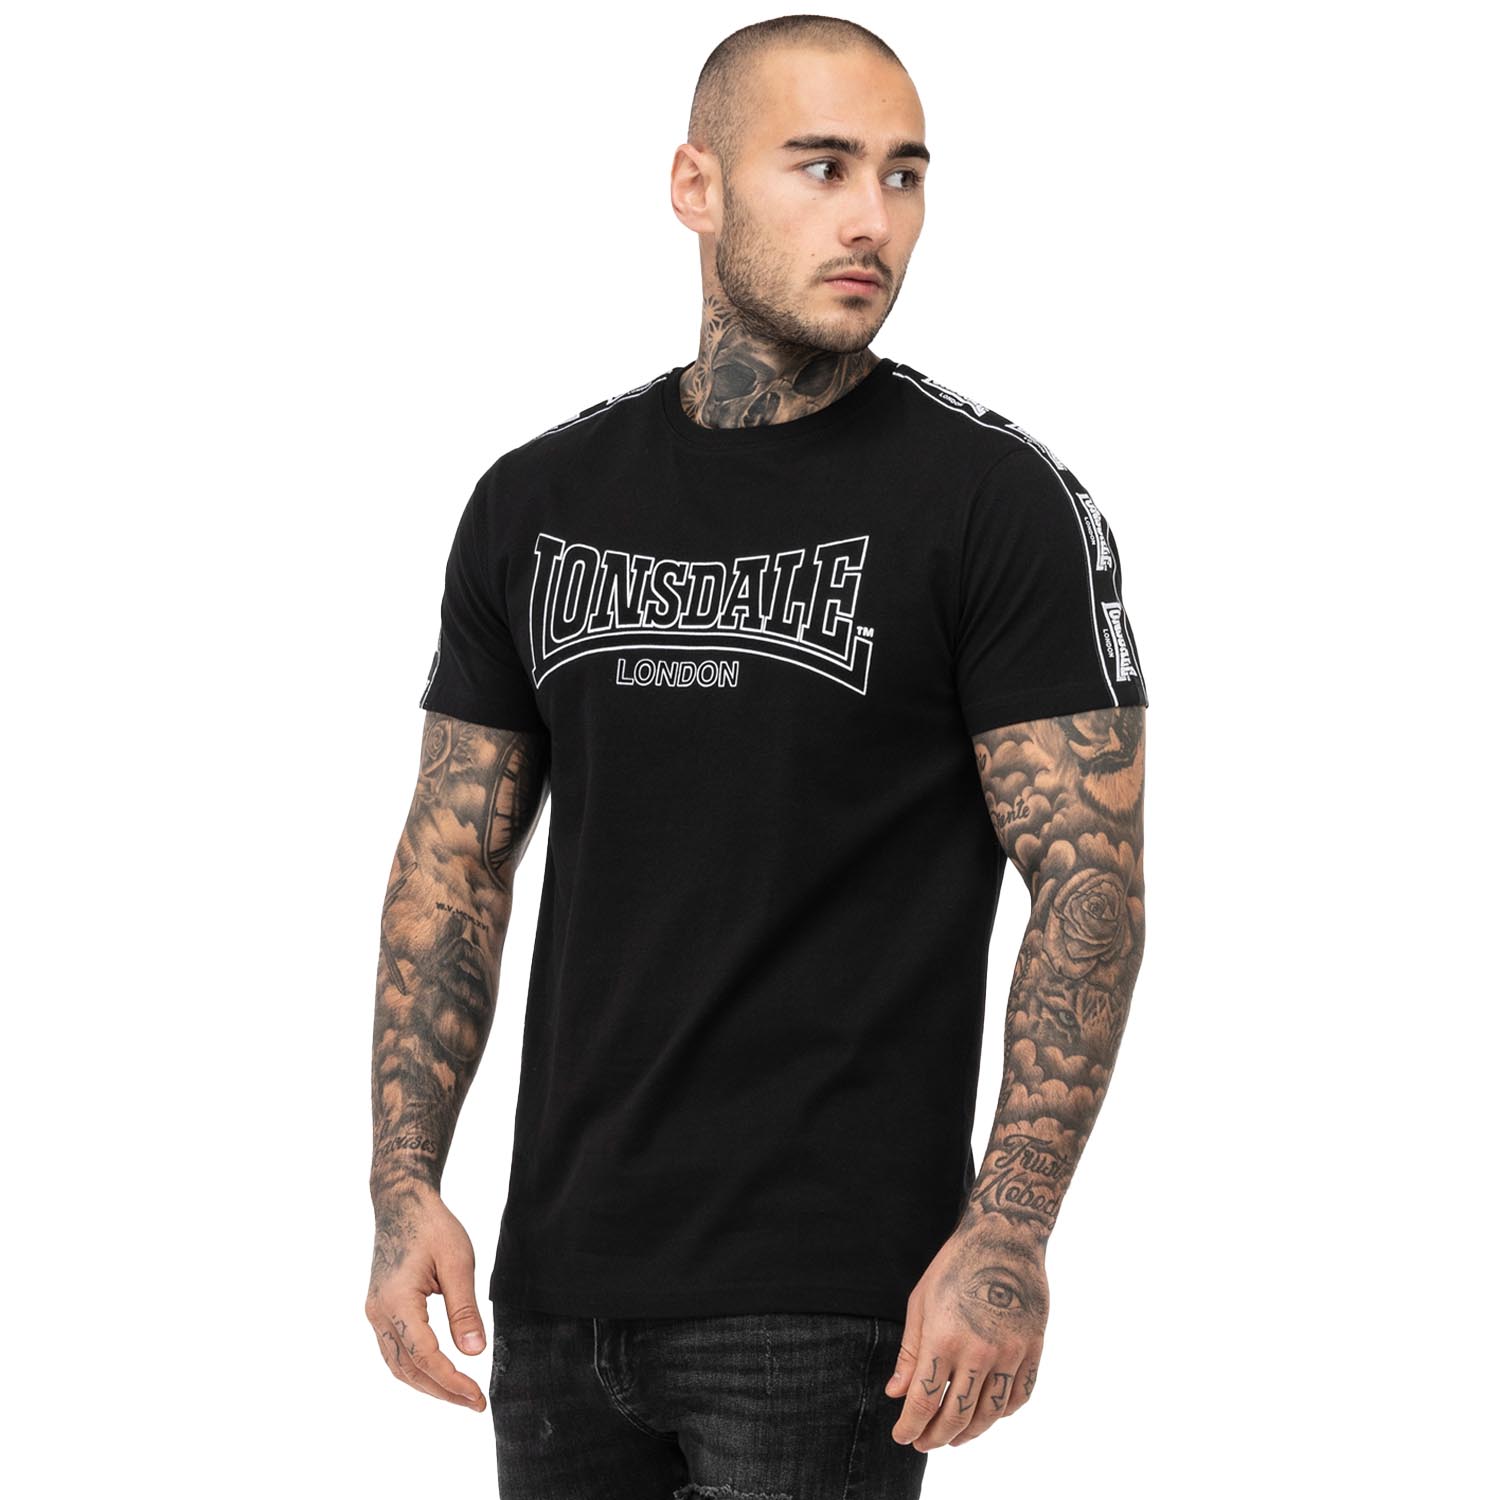 Lonsdale T-Shirt, Vementry, black